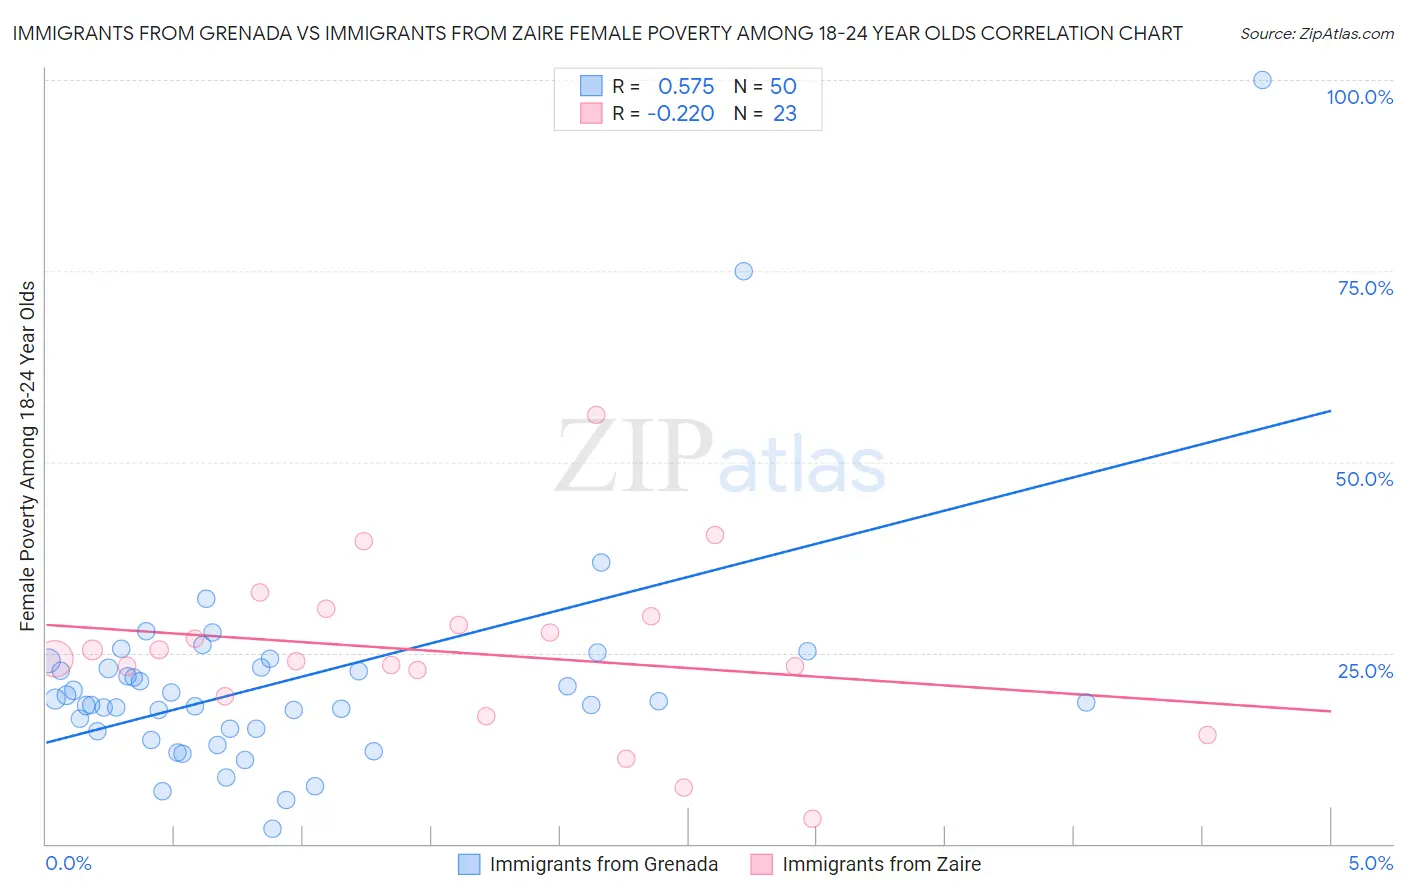 Immigrants from Grenada vs Immigrants from Zaire Female Poverty Among 18-24 Year Olds